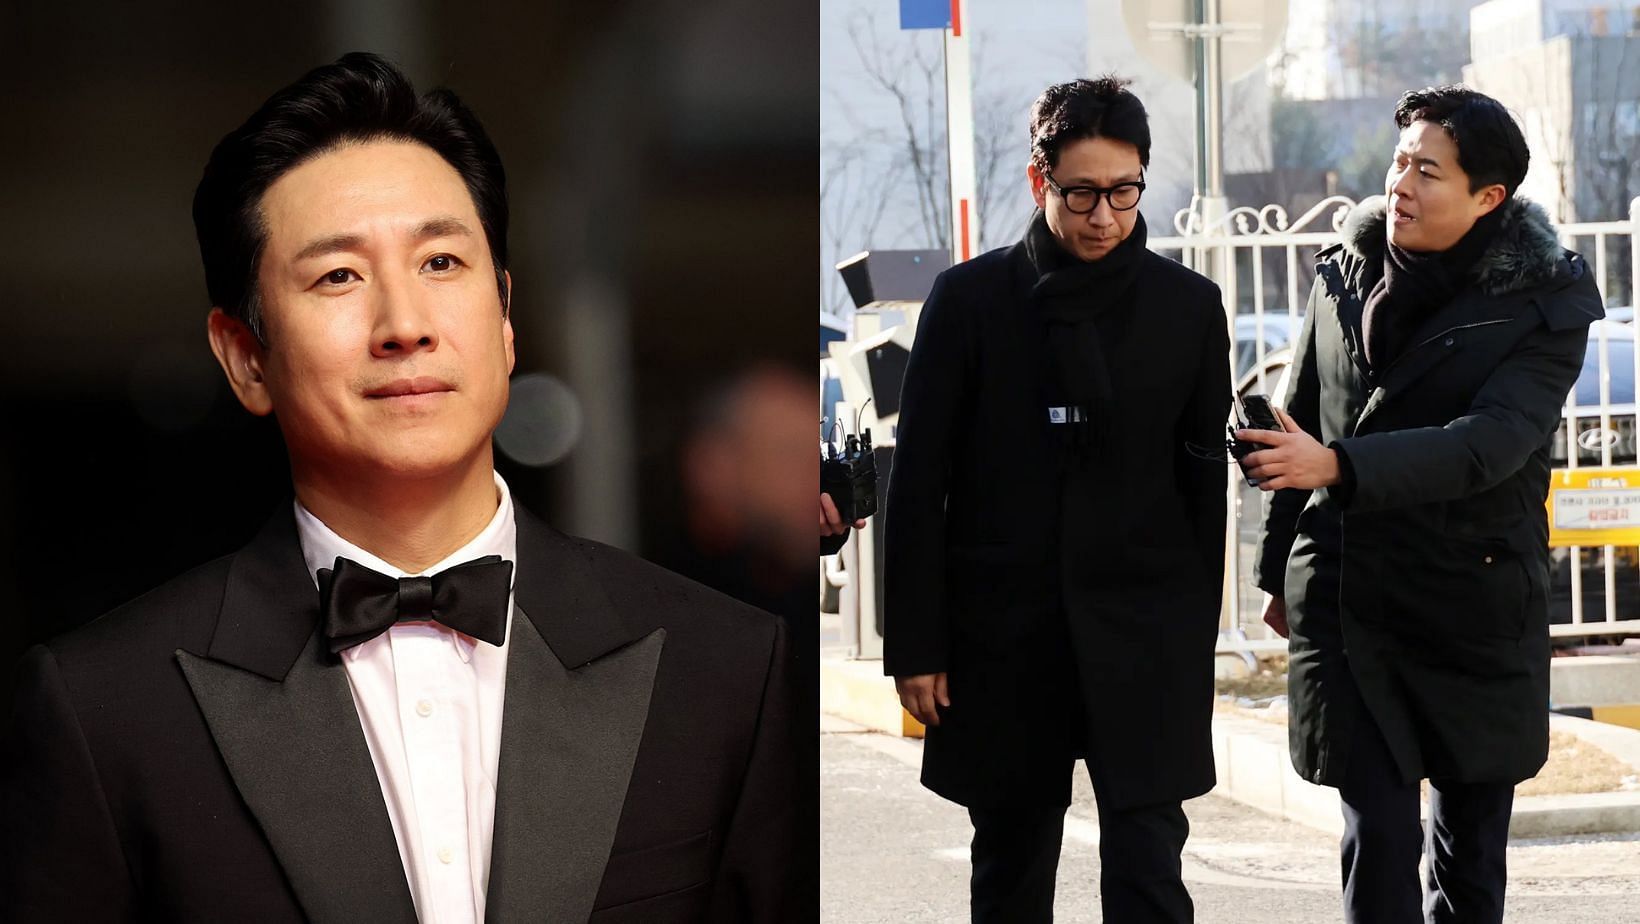 Later actor Lee Sun-kyun was blackmailed by two women. (Image via X/@theasianboss, @3vilbasterd)